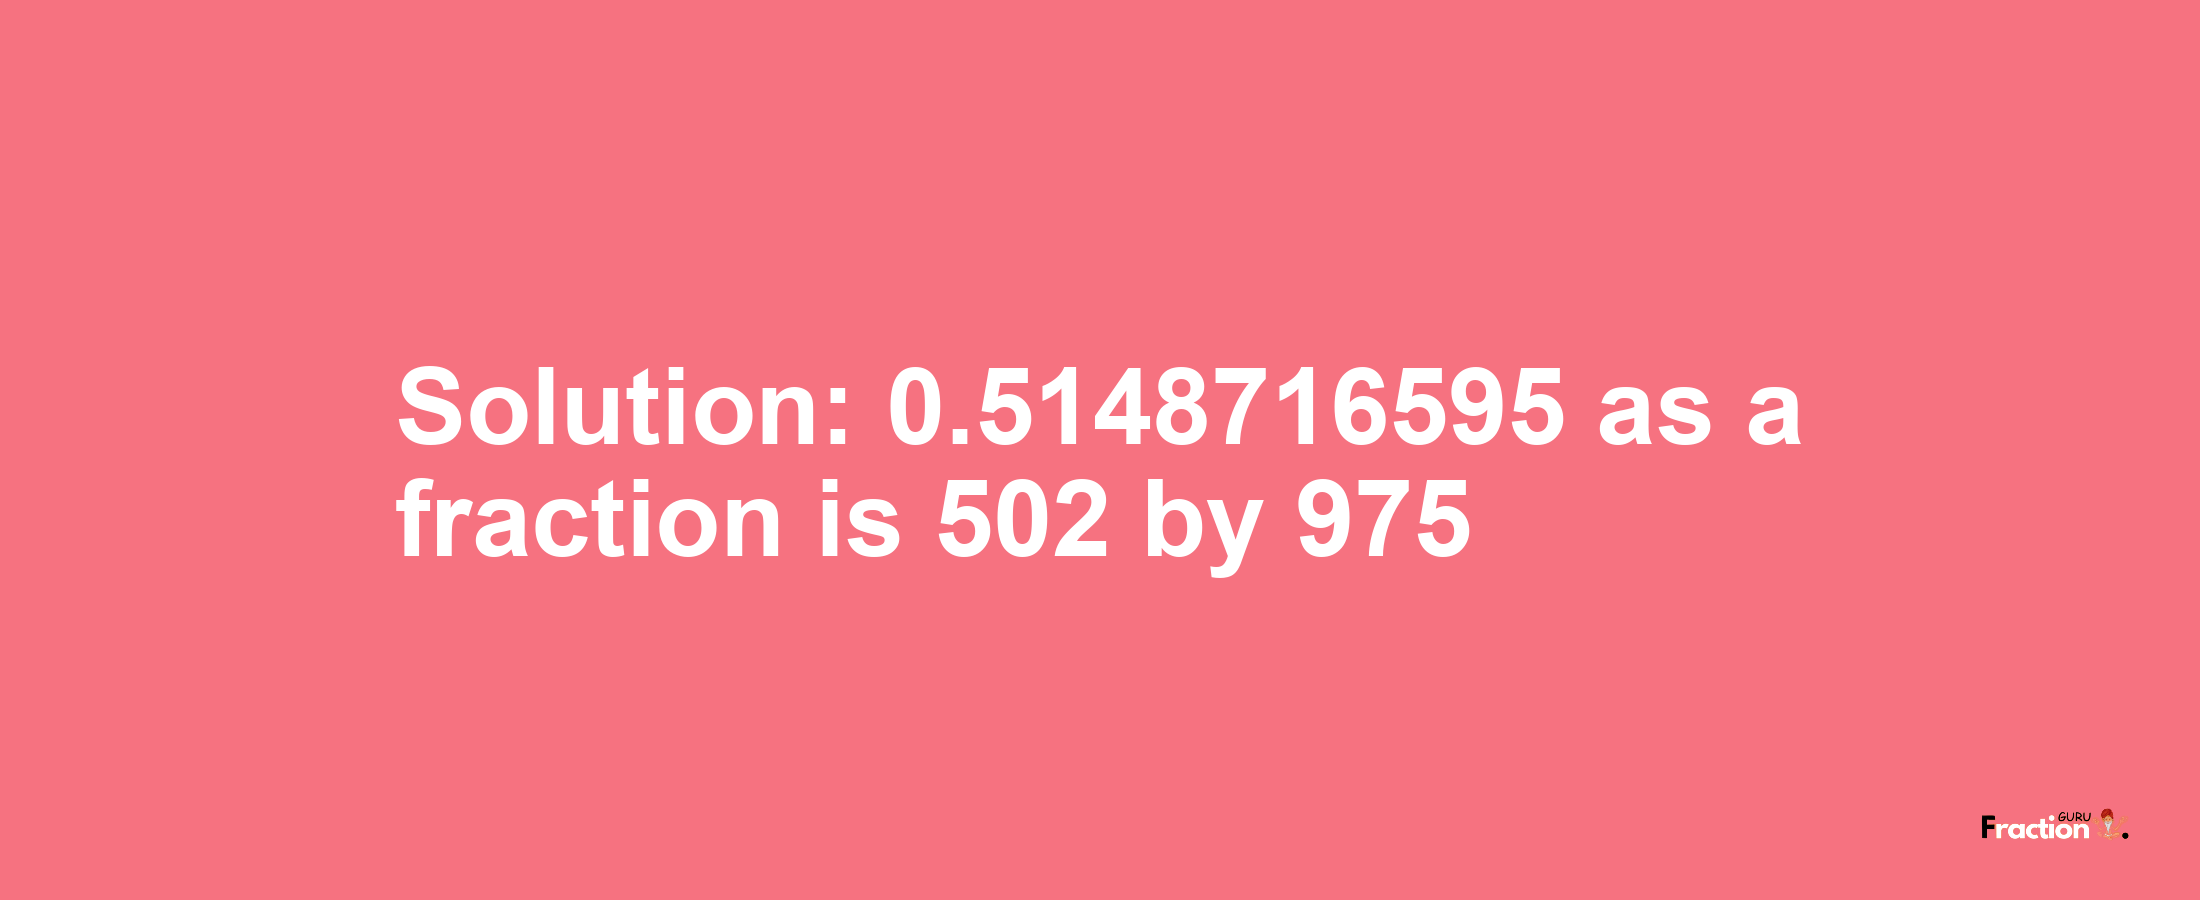 Solution:0.5148716595 as a fraction is 502/975